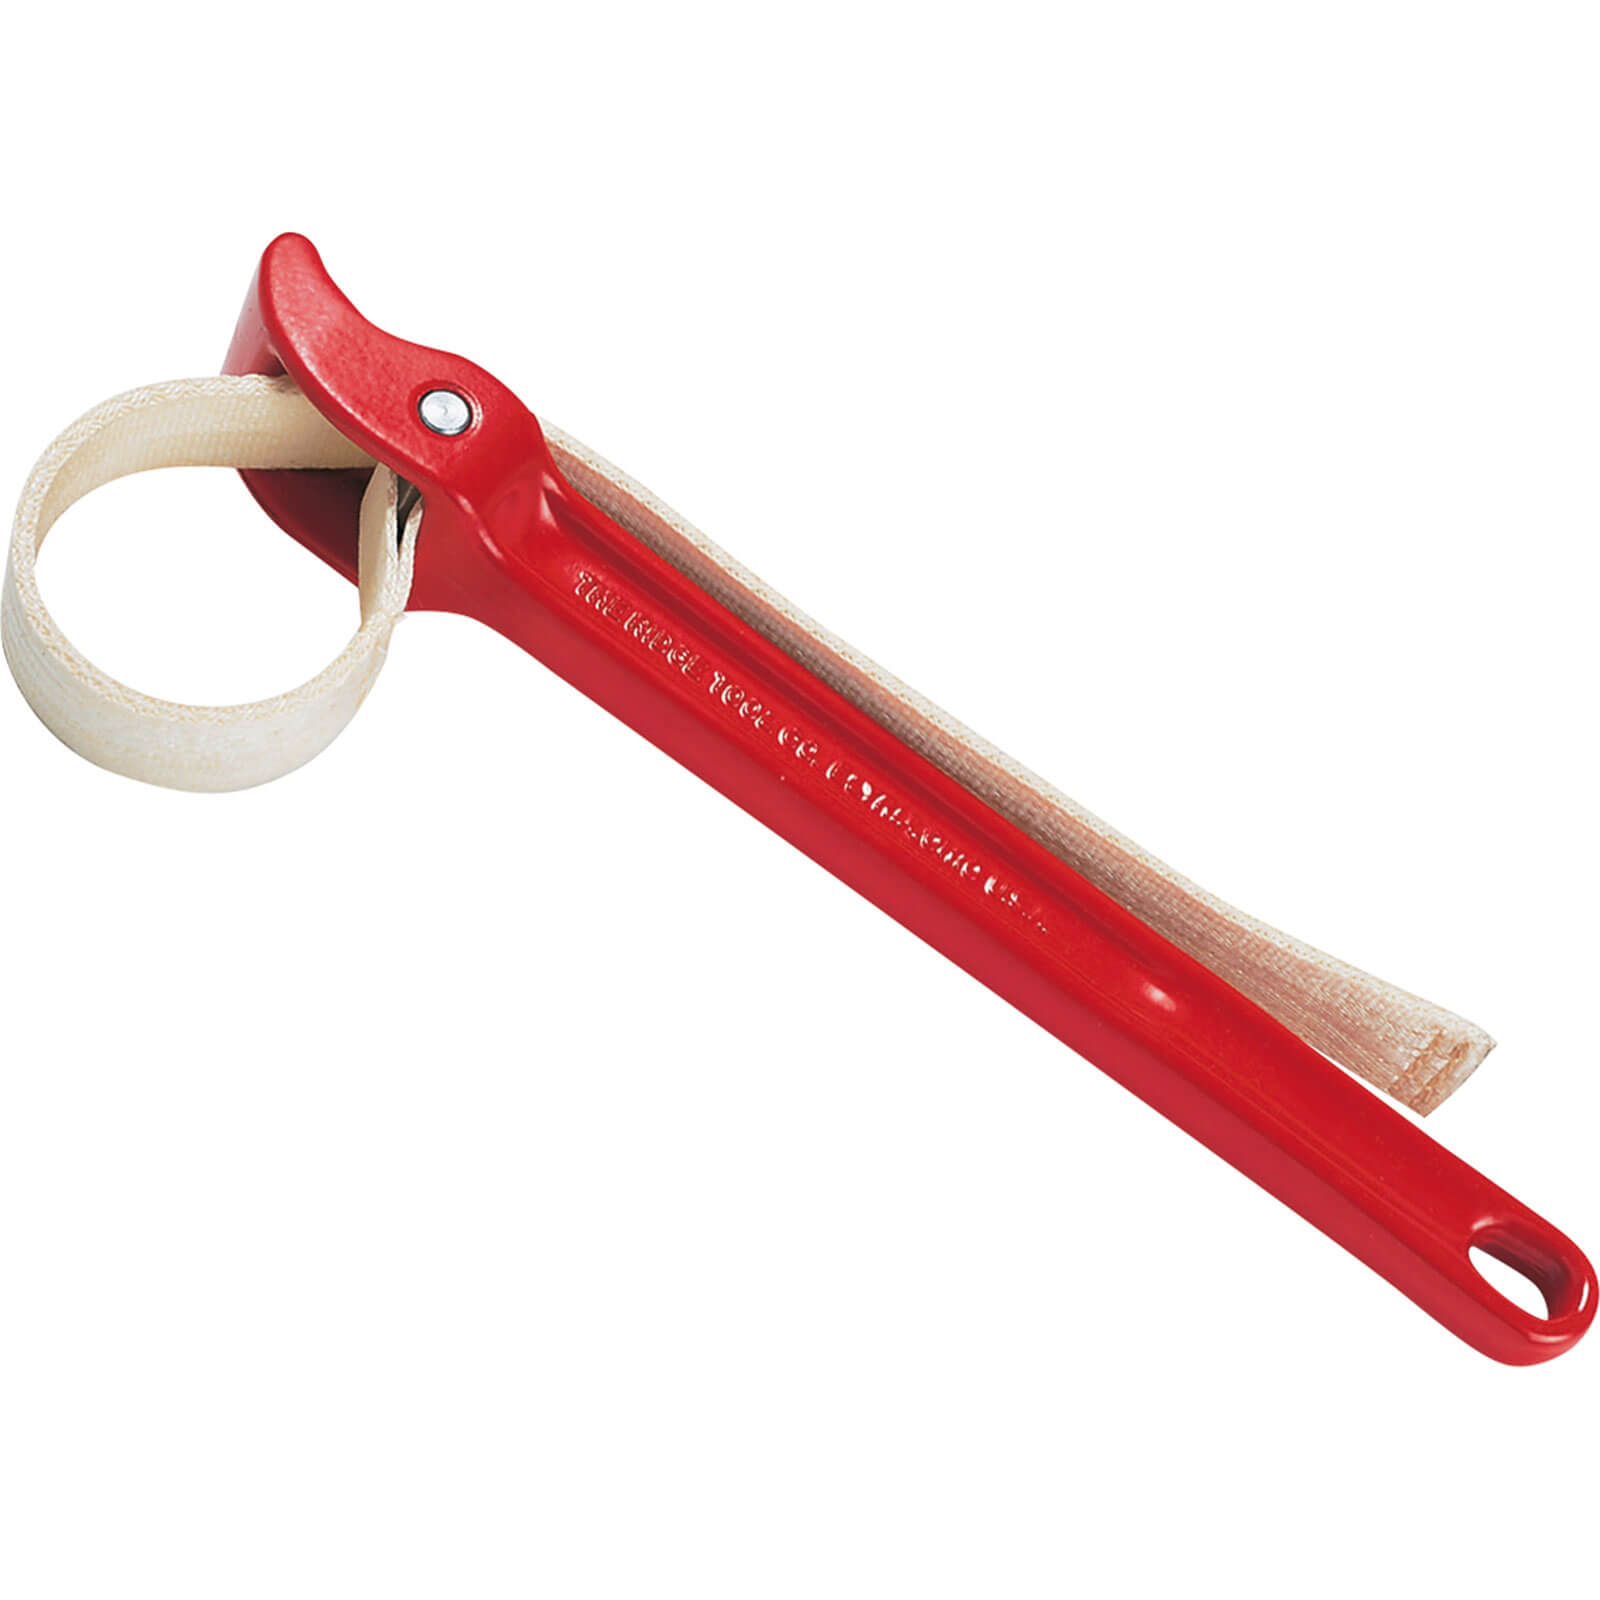 Ridgid Strap Wrench for Plastic Pipe 750mm